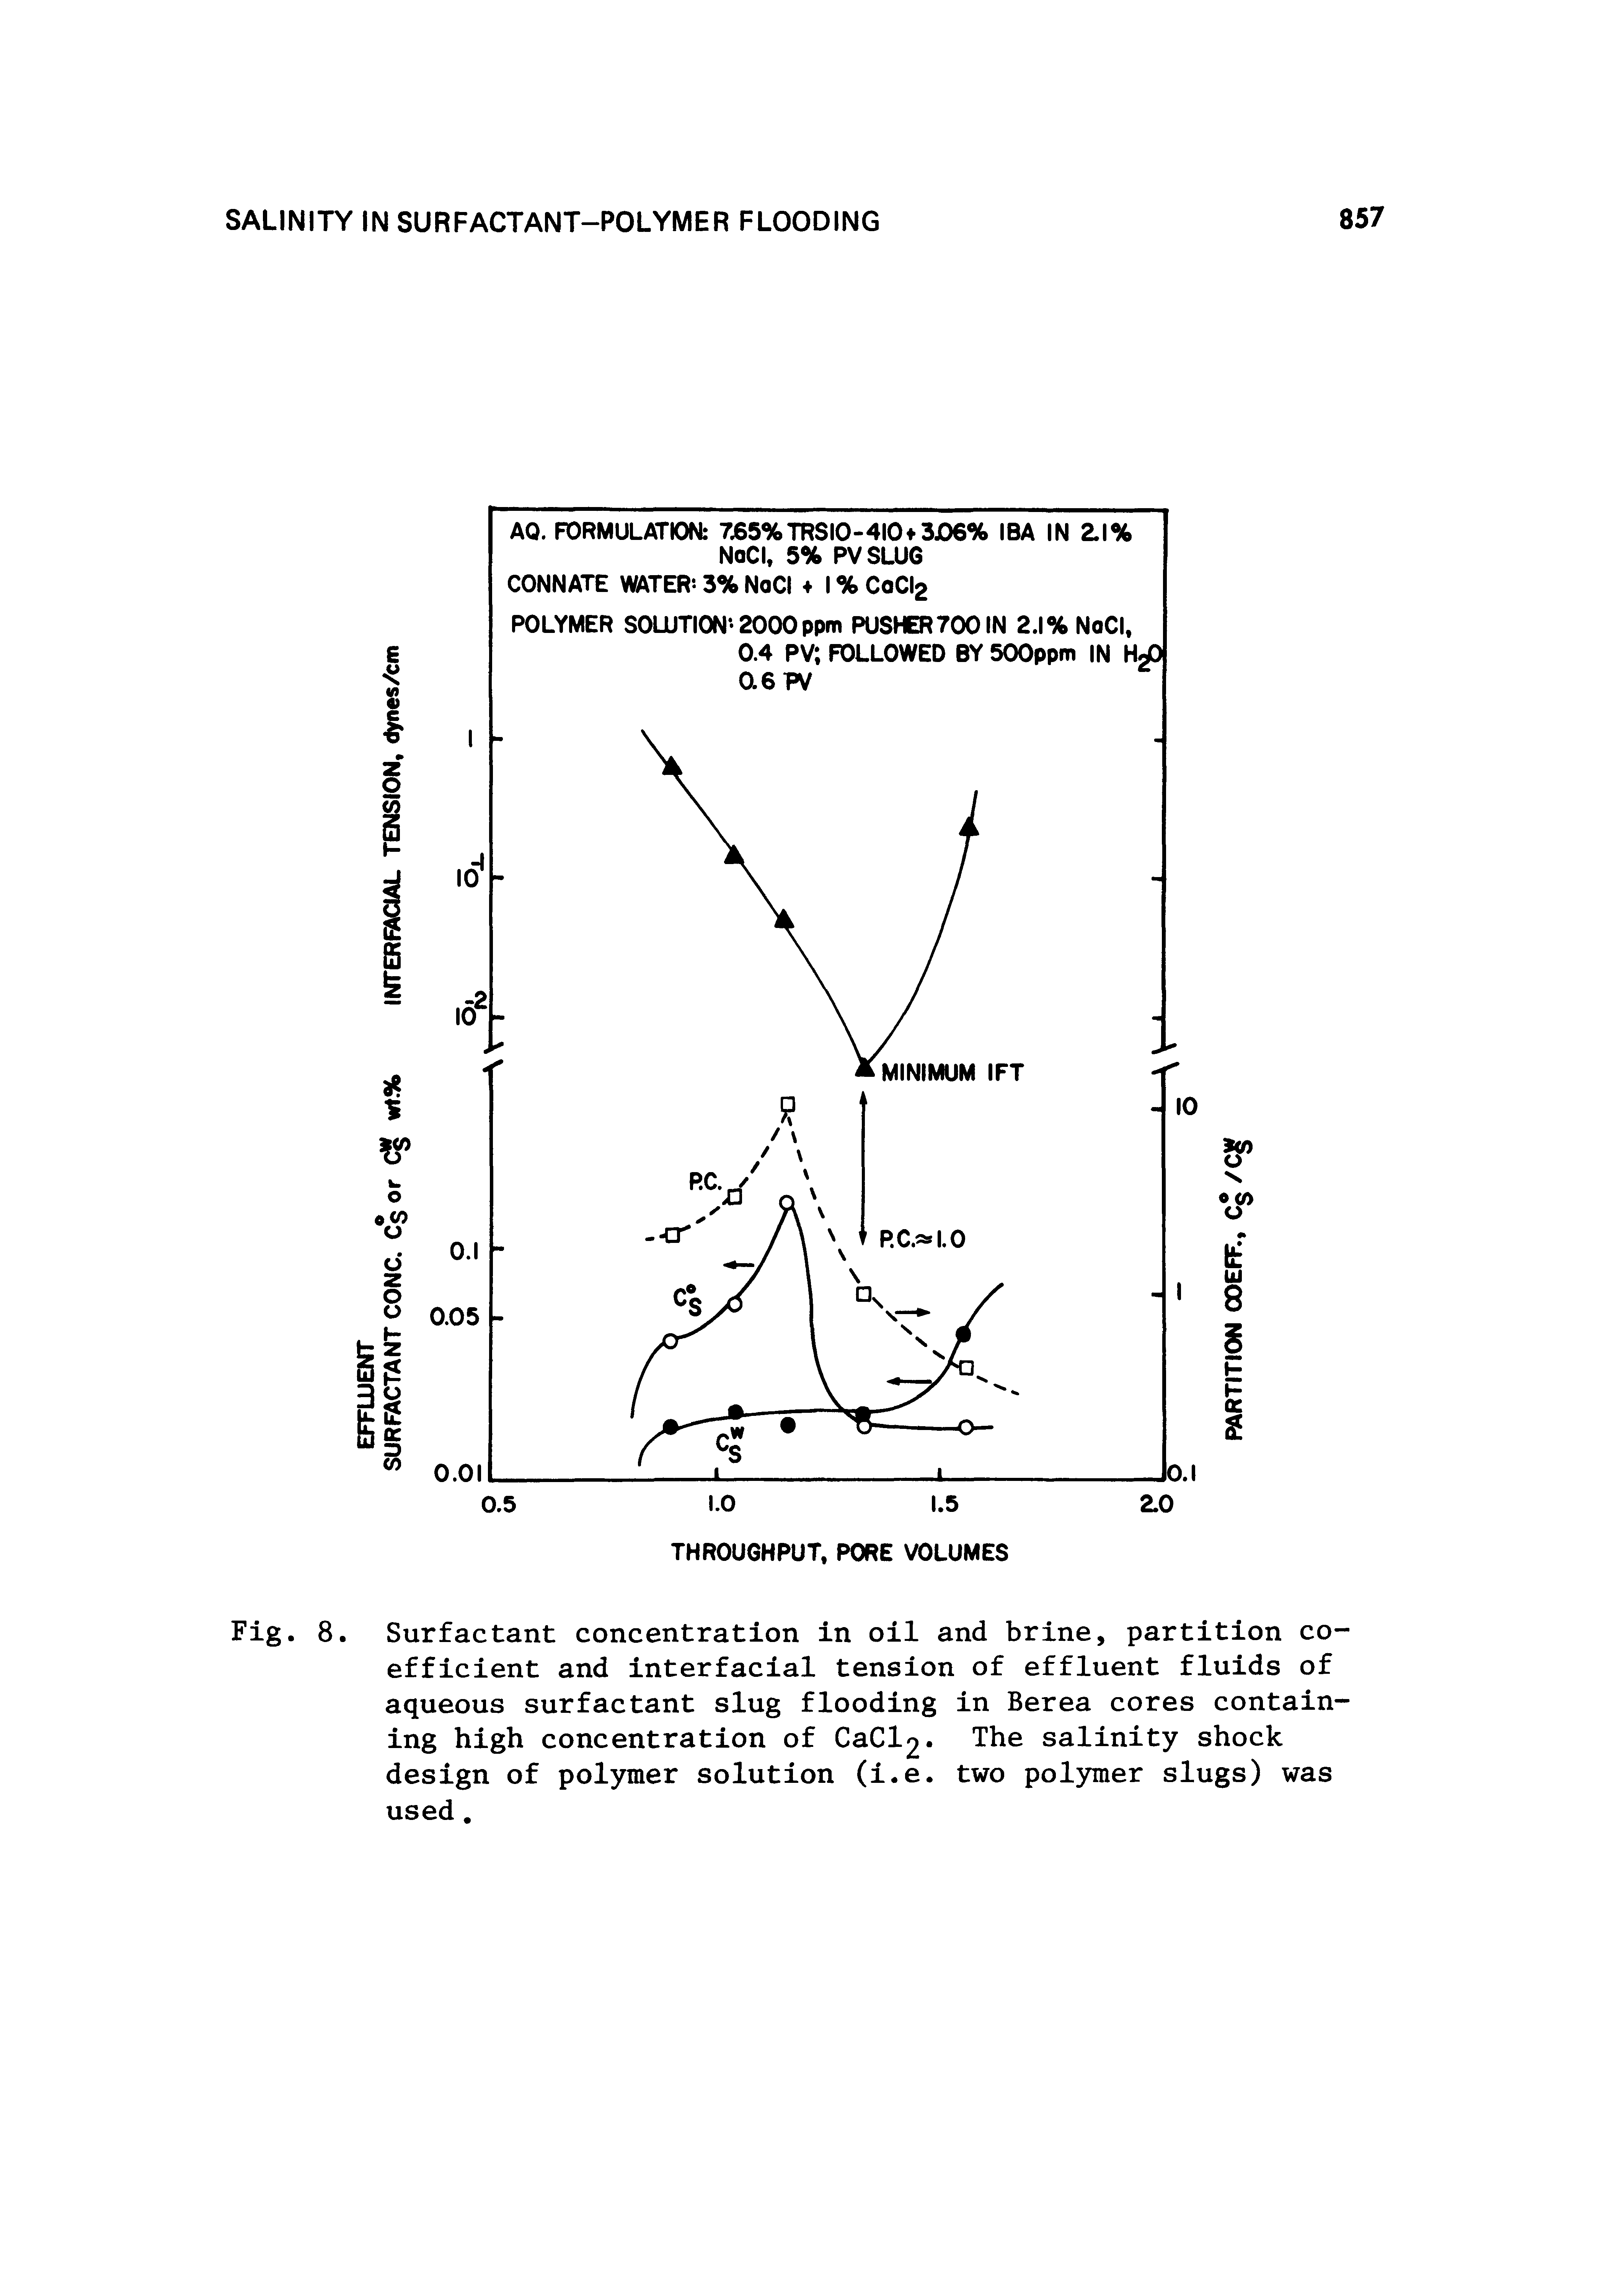 Fig. 8. Surfactant concentration in oil and brine, partition coefficient and interfacial tension of effluent fluids of aqueous surfactant slug flooding in Berea cores containing high concentration of CaCl2. The salinity shock design of polymer solution (i.e. two pol3rmer slugs) was used.